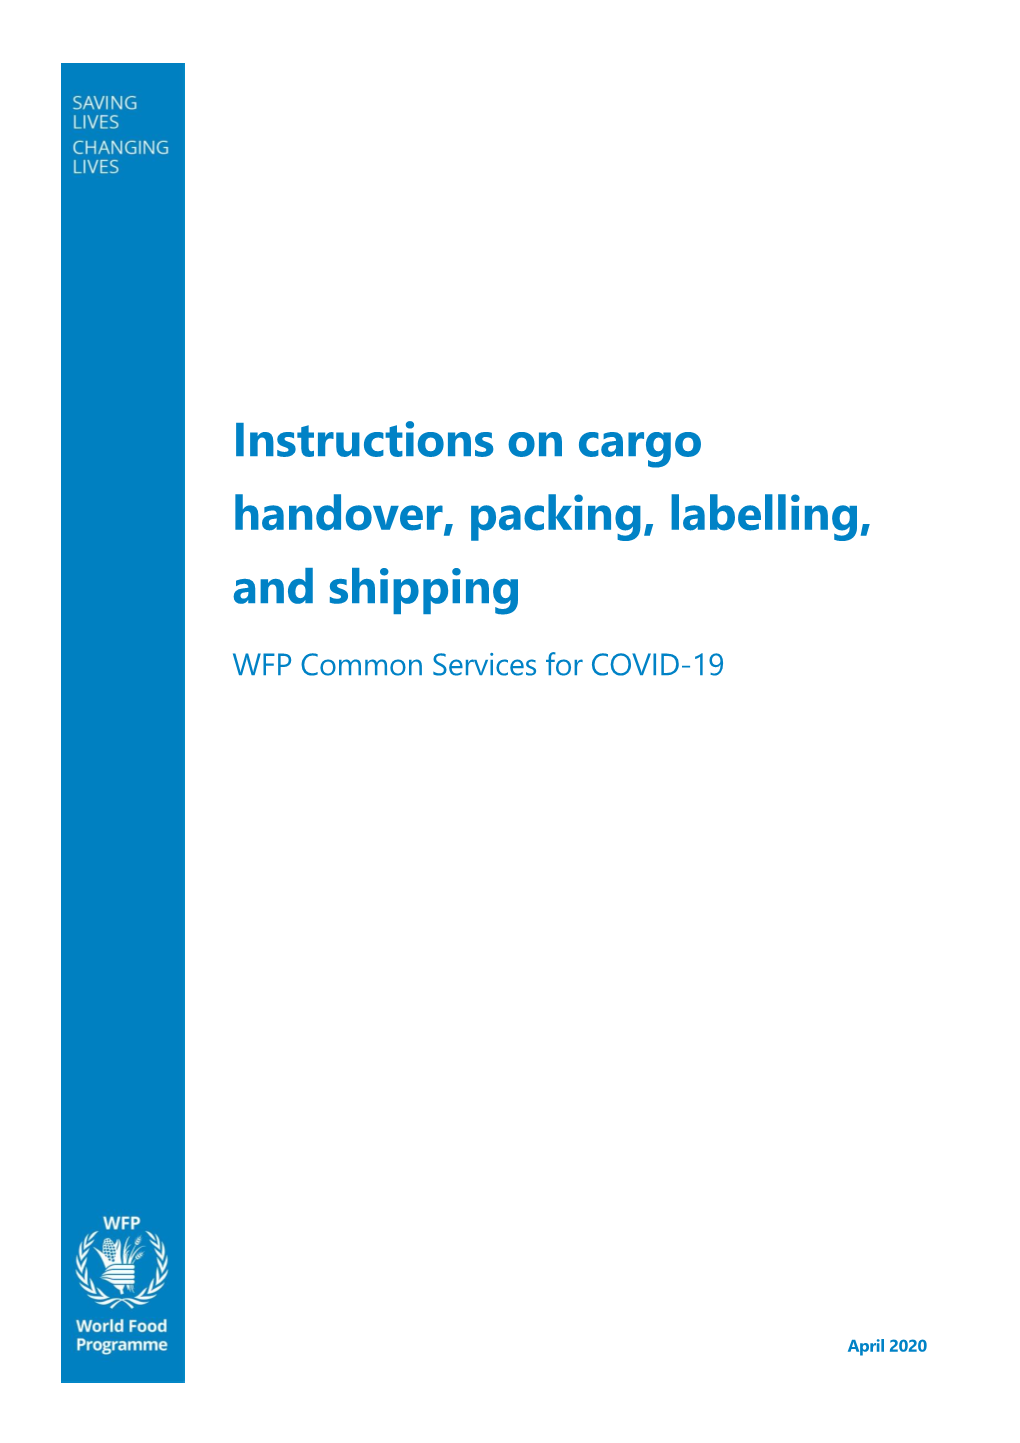 Instructions on Cargo Handover, Packing, Labelling, and Shipping